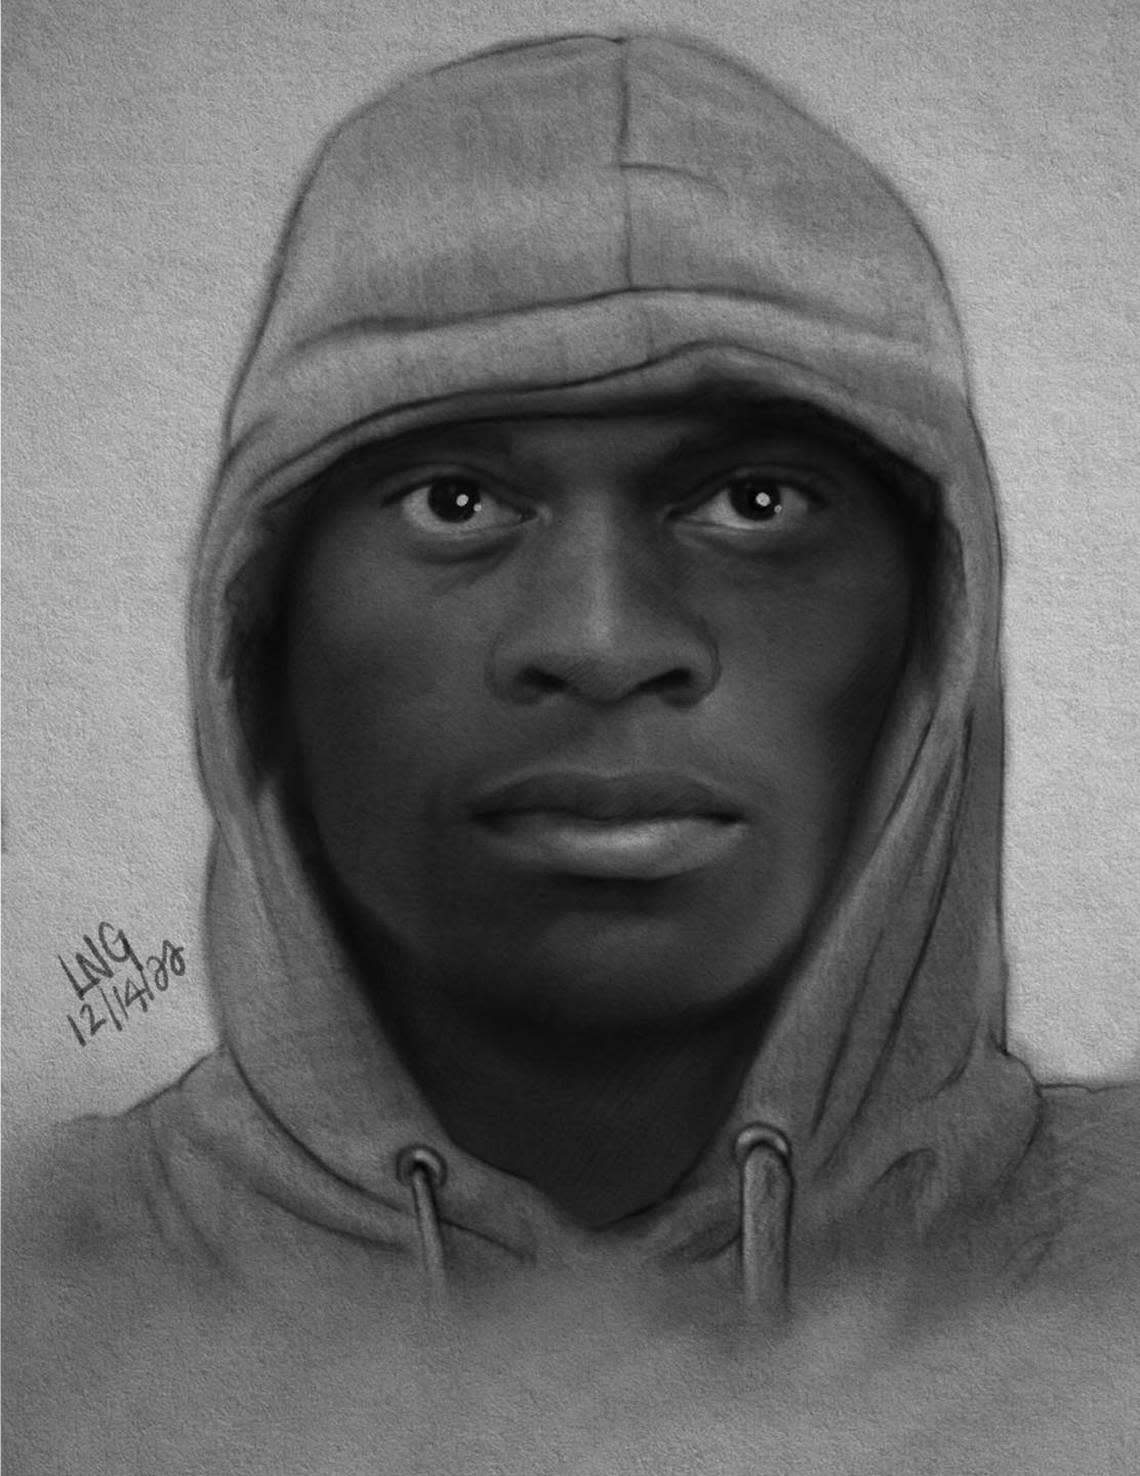 A witness provided the sheriff’s office with information for the sketch of a shooter who’s wanted on an attempted murder charge in Sumter County. Sumter County Sheriff's Office